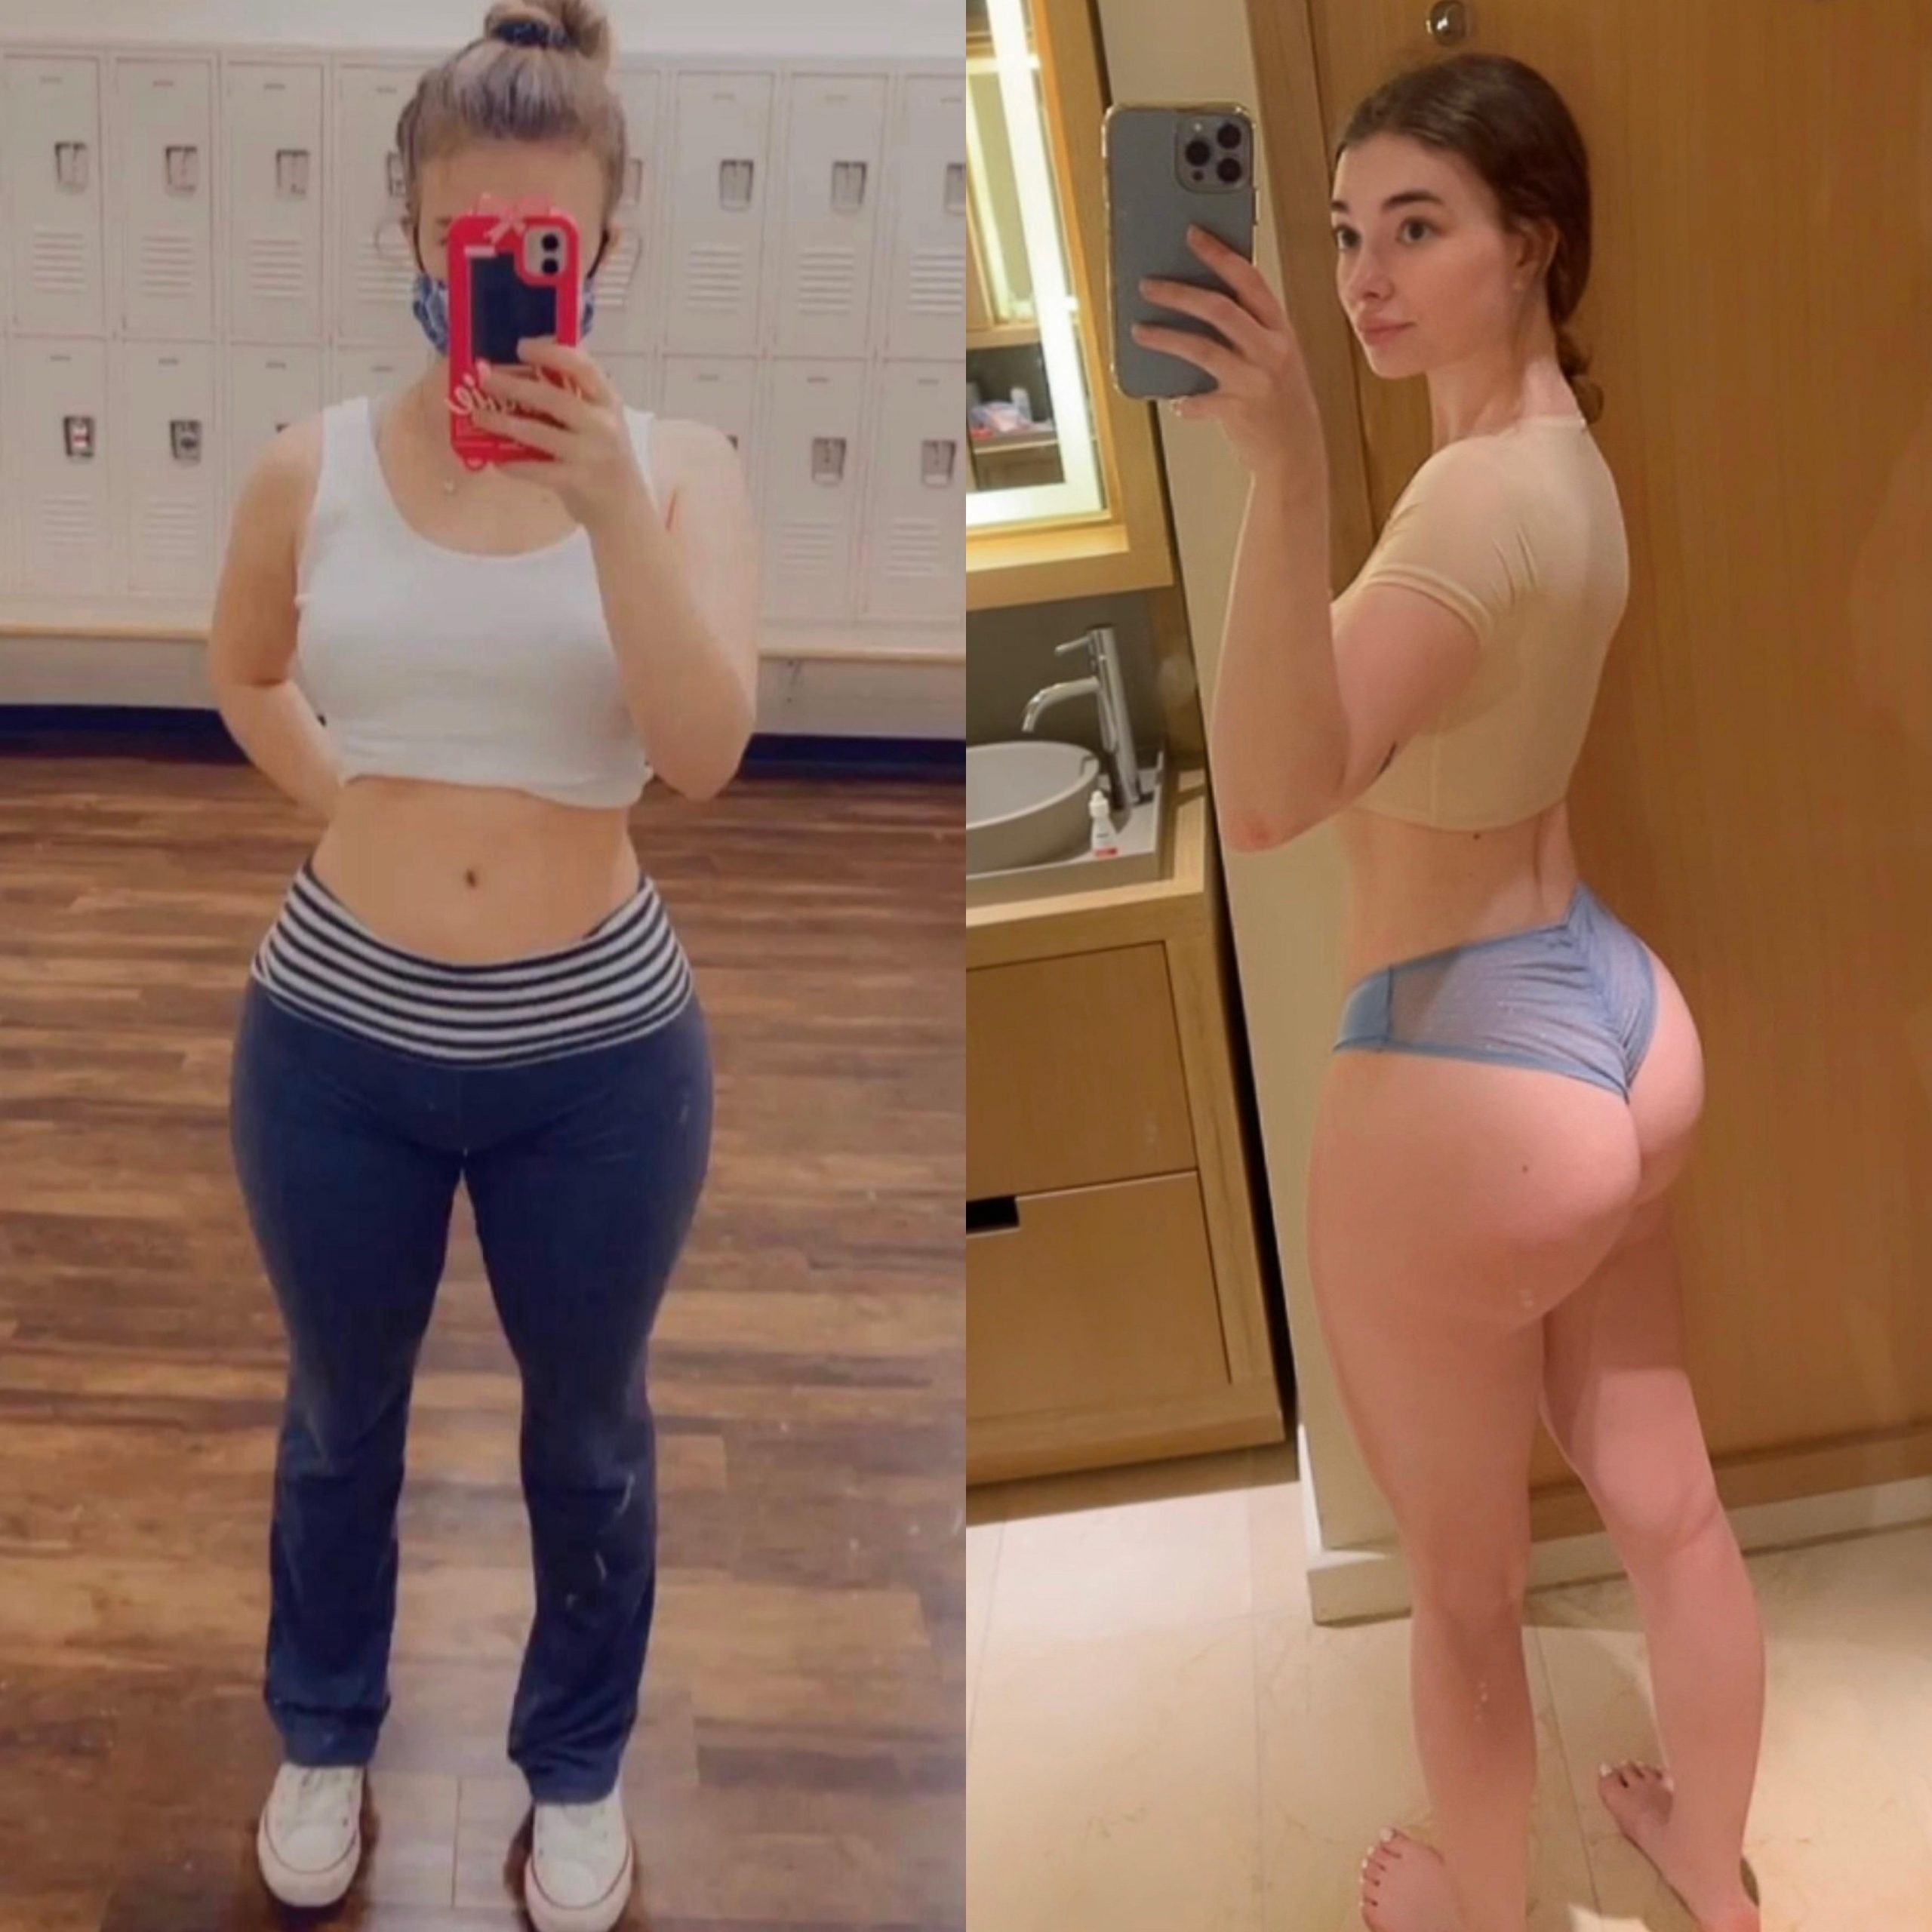 What The Gym Sees Vs What Reddit Sees 😜